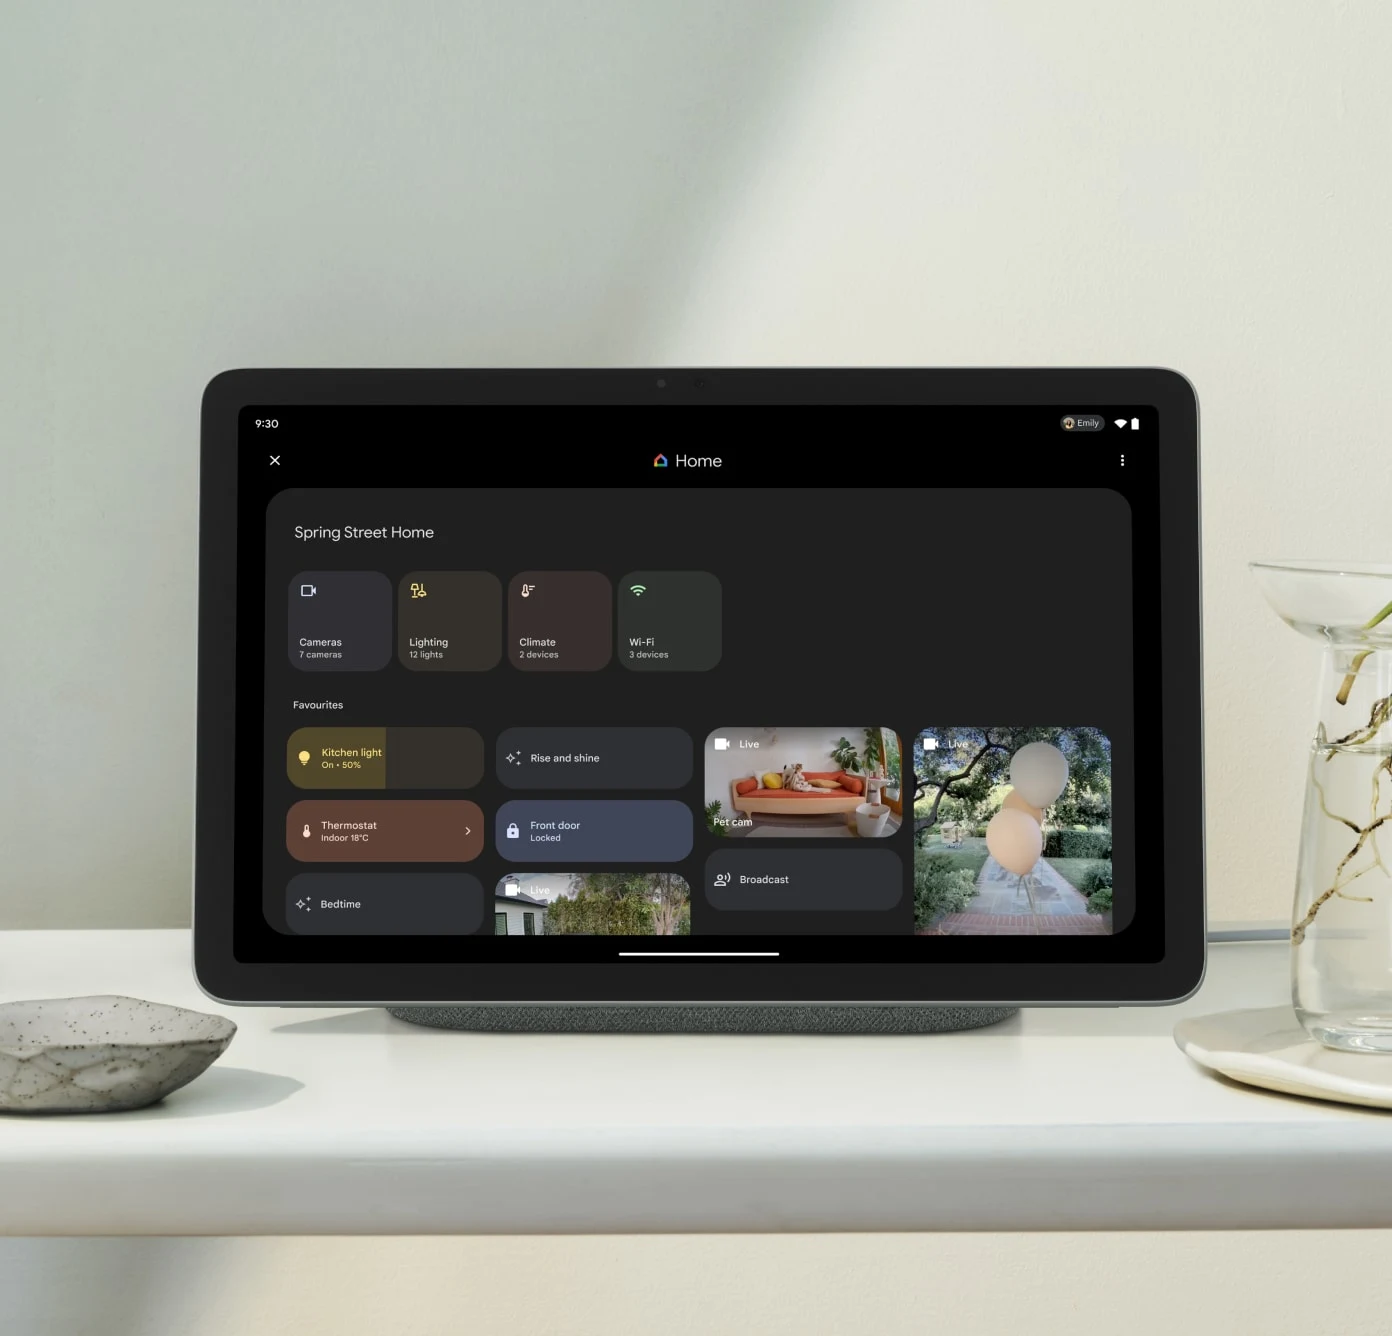 We see a Pixel Tablet with smart home controls on display.